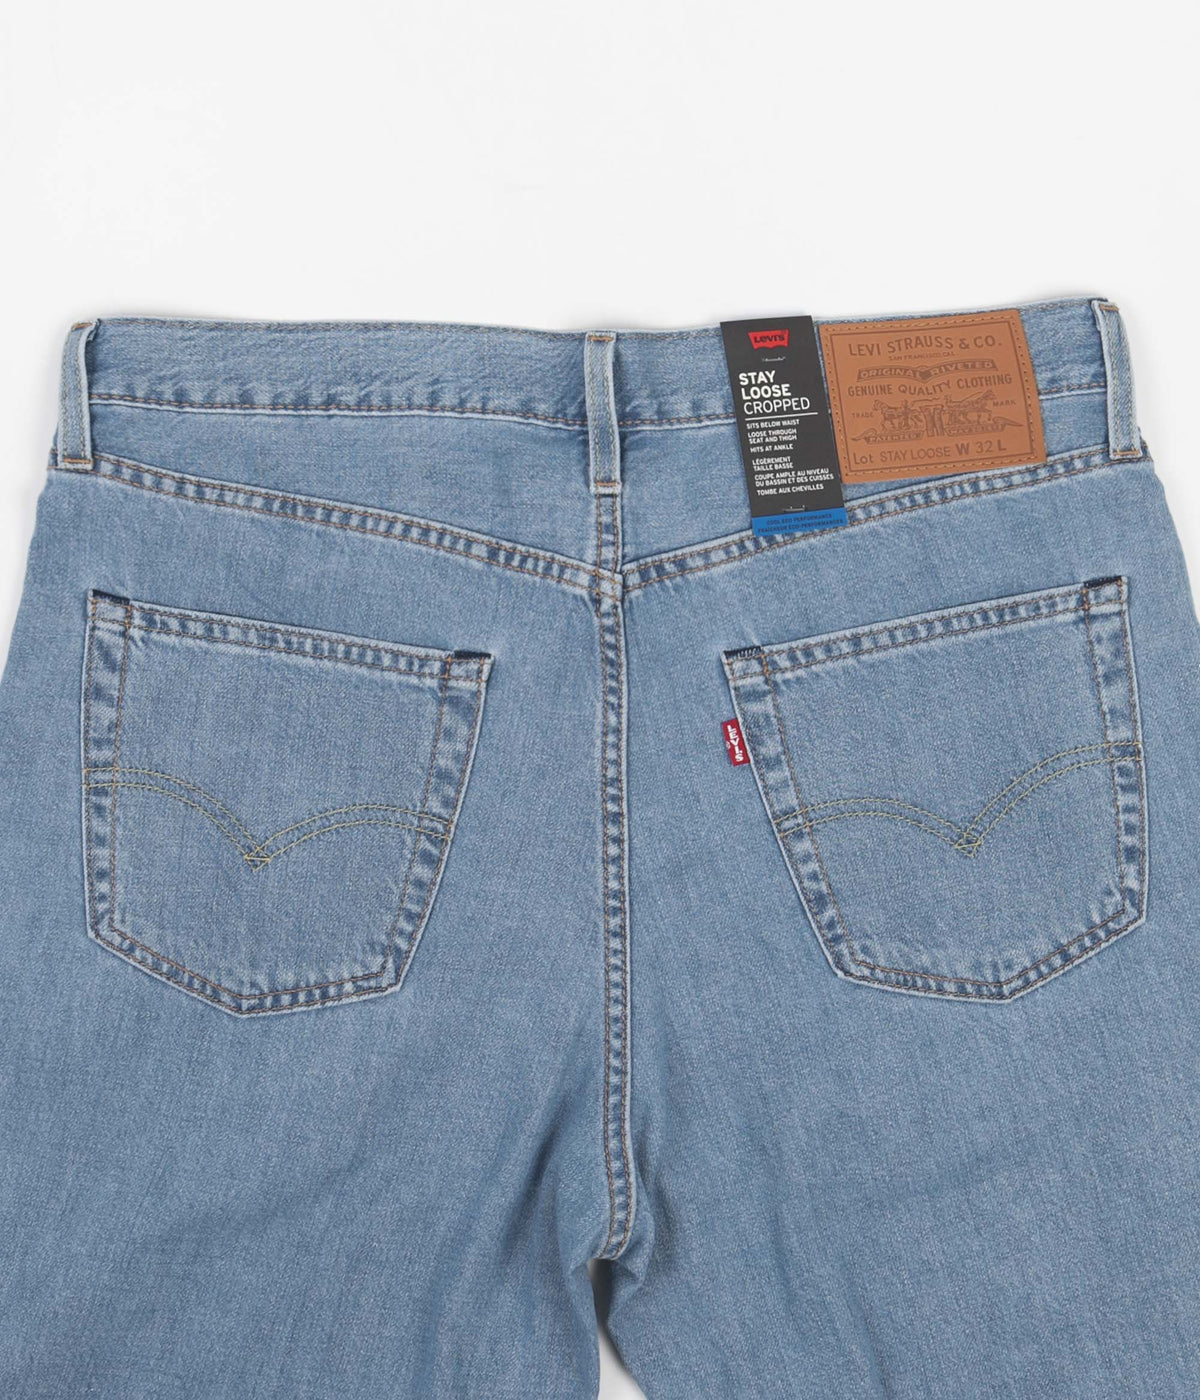 Levi's® Red Tab™ Stay Loose Pleated Crop Jeans - Light Indigo